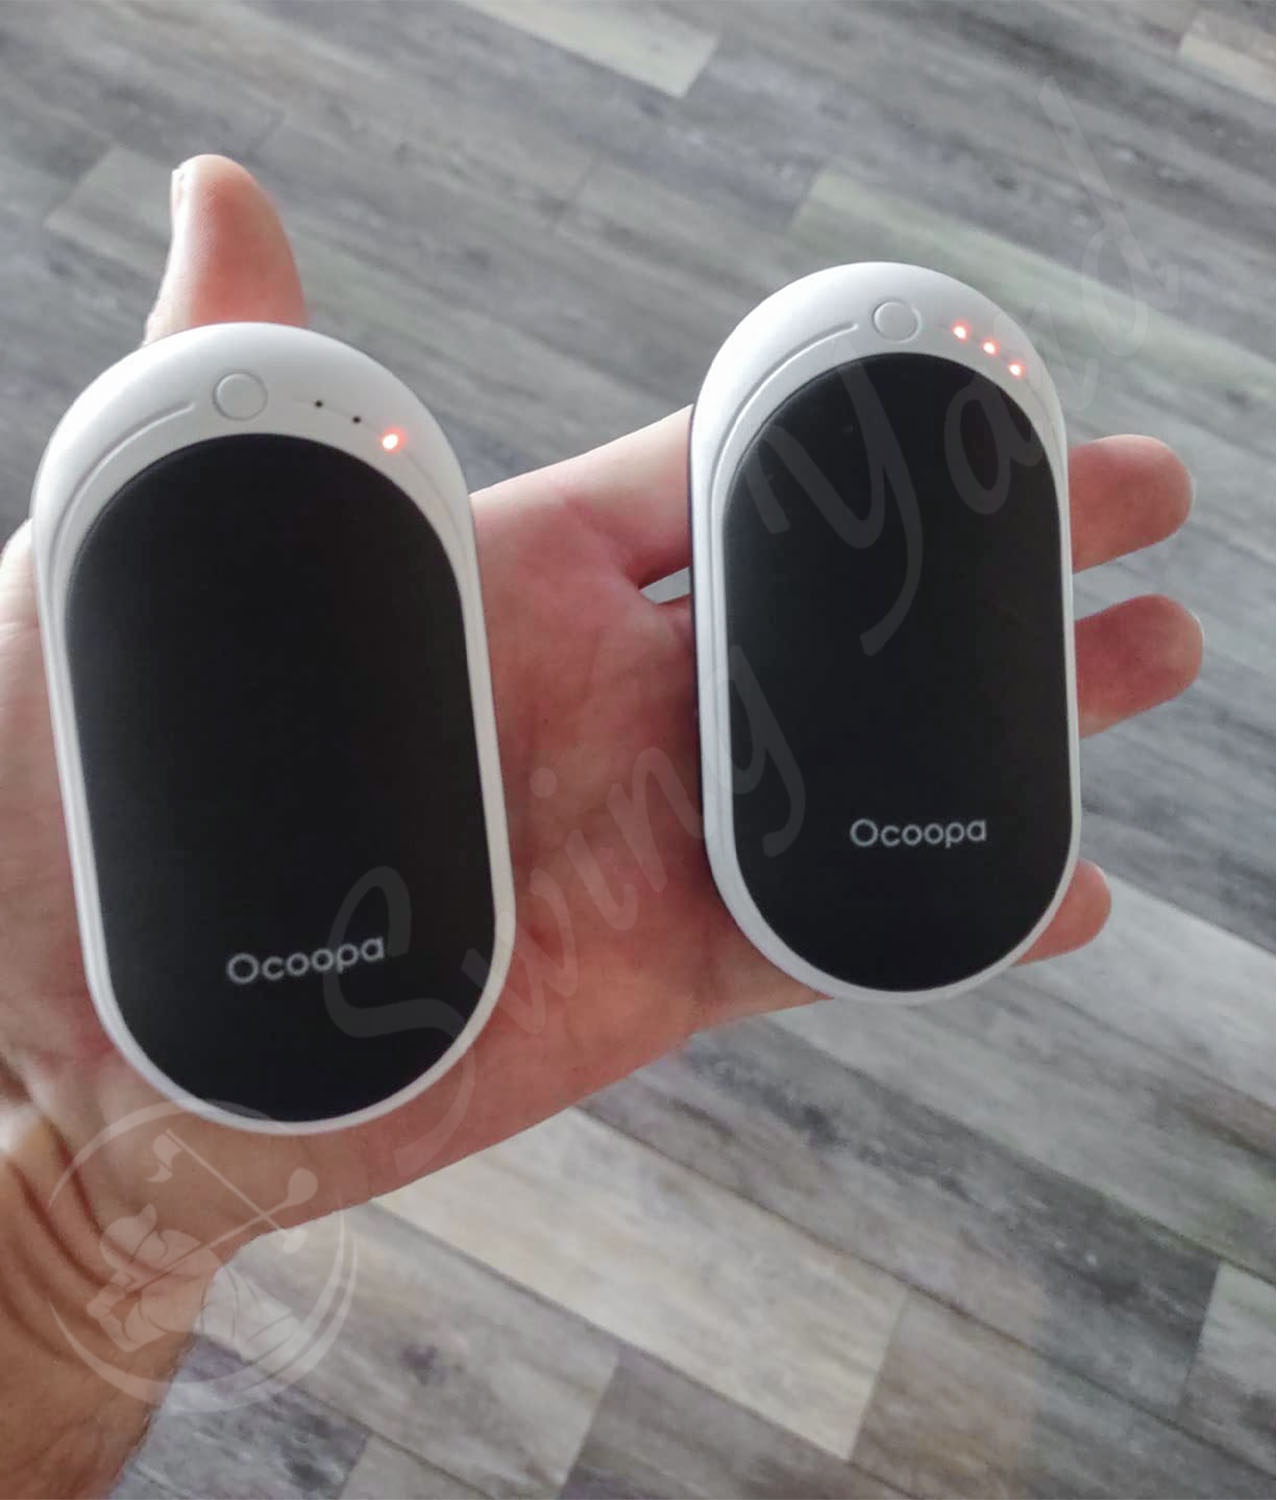 A OCOOPA rechargeable hand warmers tested in my hand